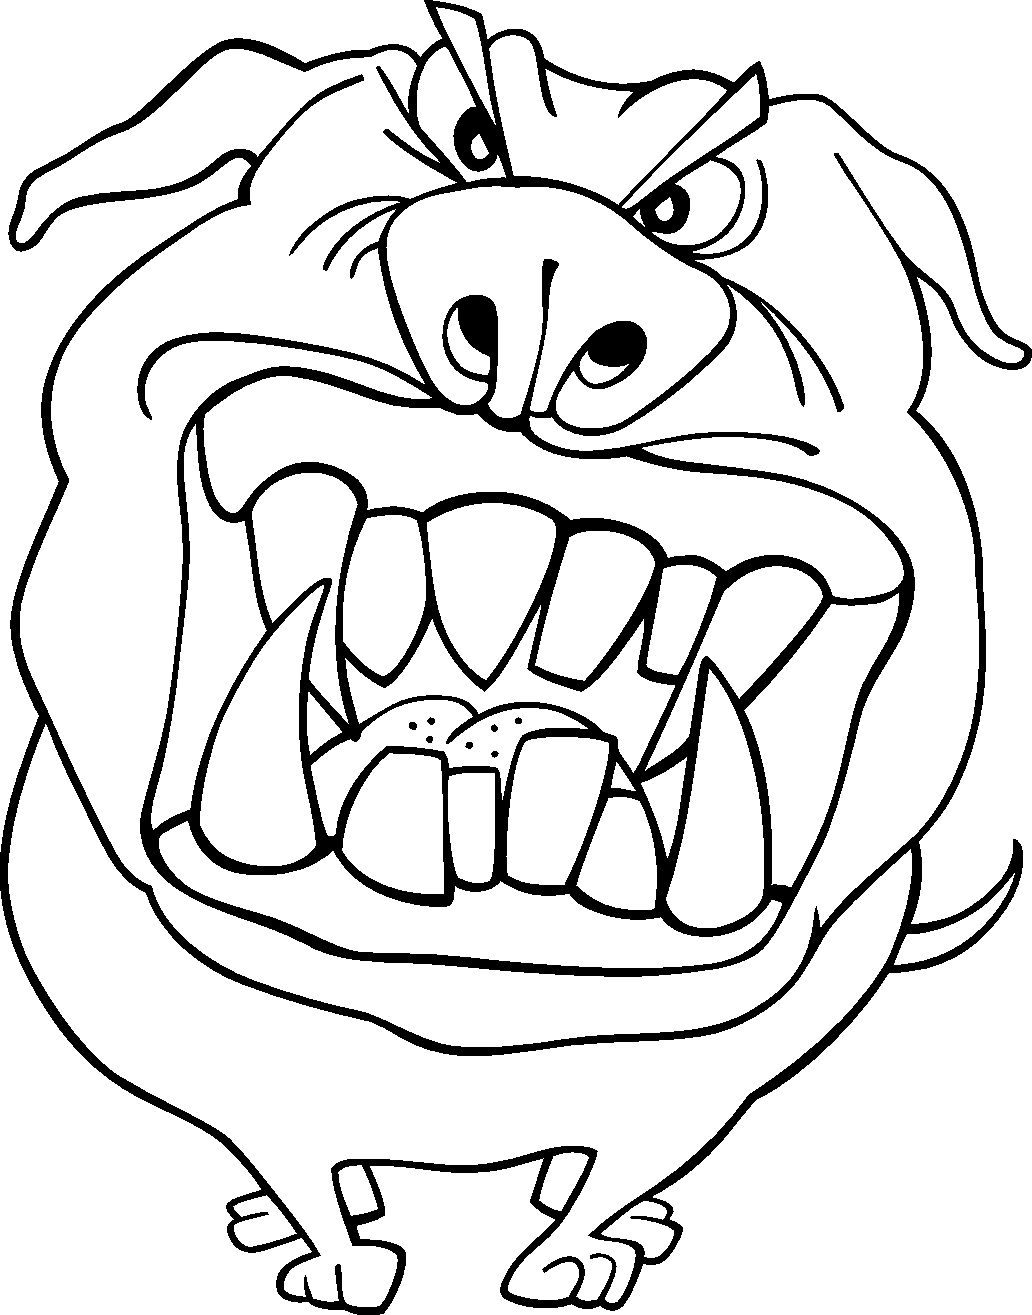 Scary Dog Face Coloring Page - Free Printable Coloring Pages for Kids